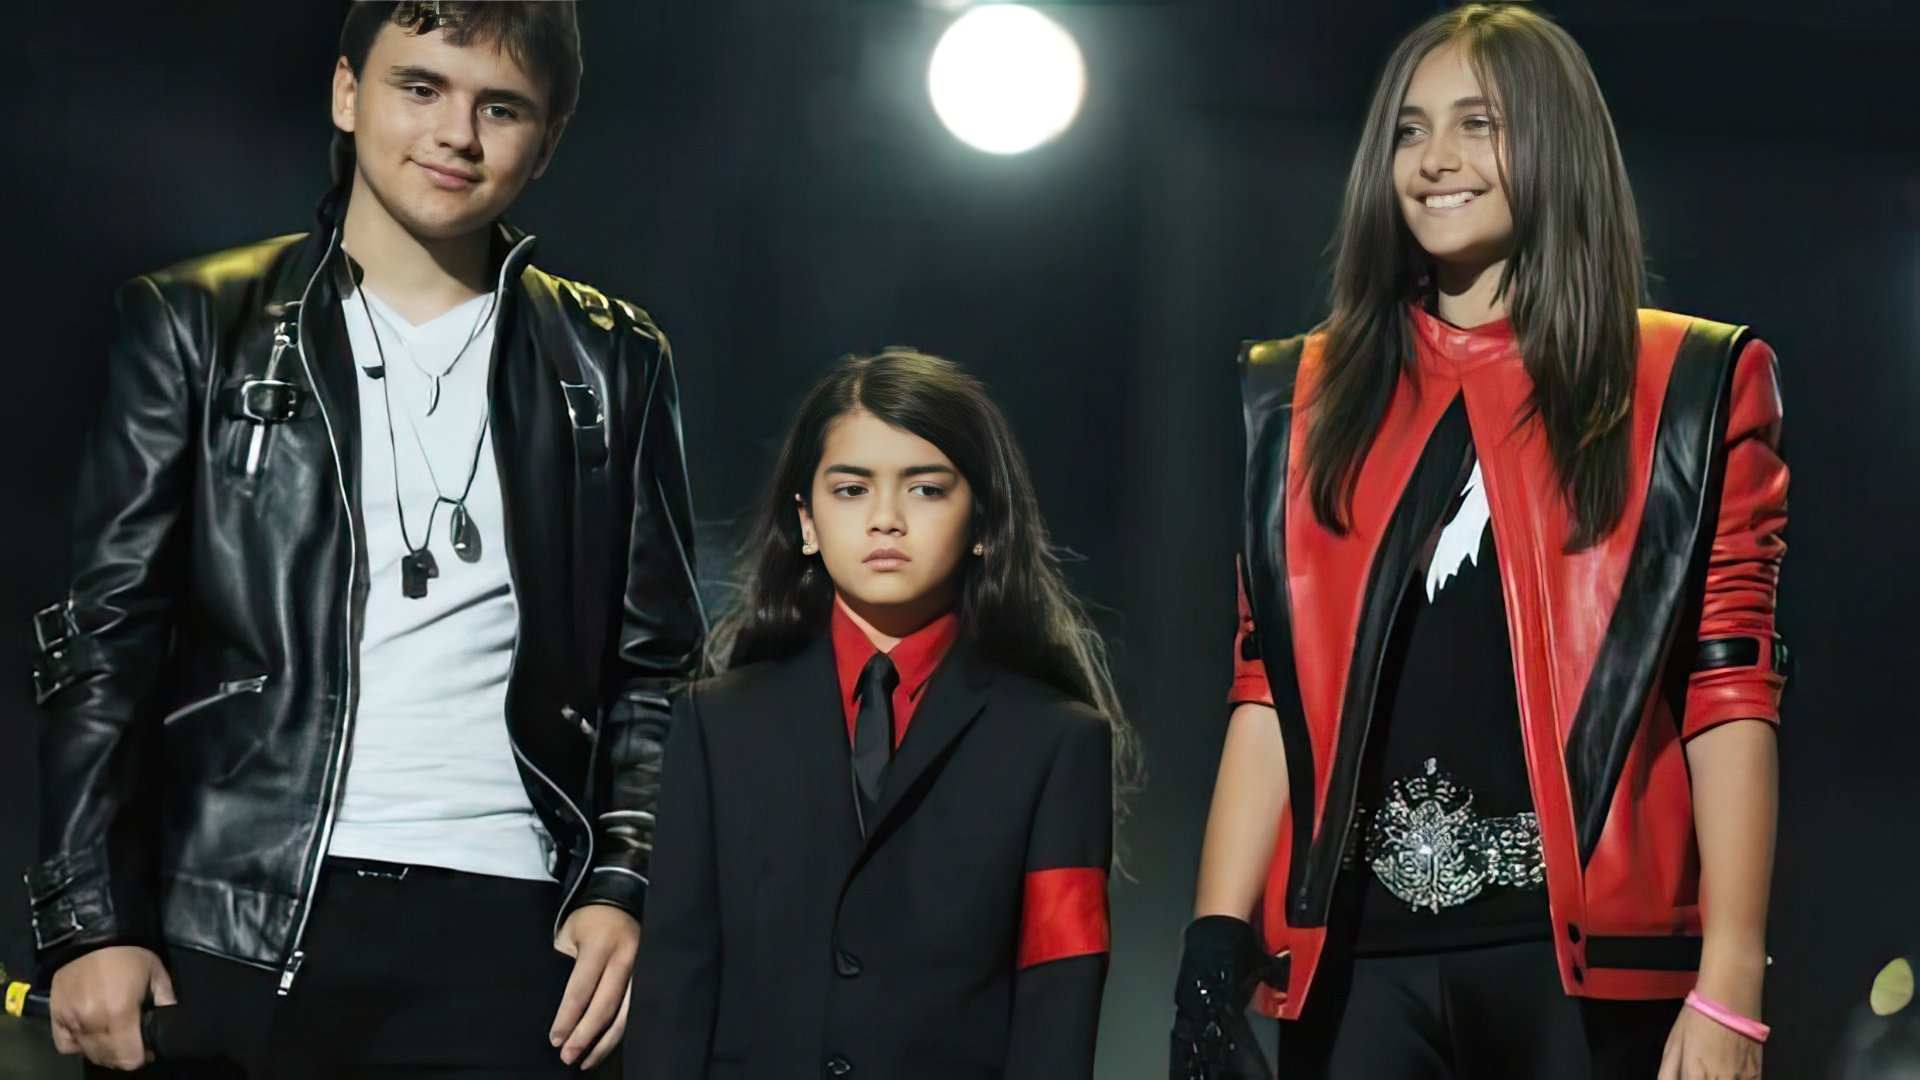 Michael Jackson's children have grown up and chosen their own path